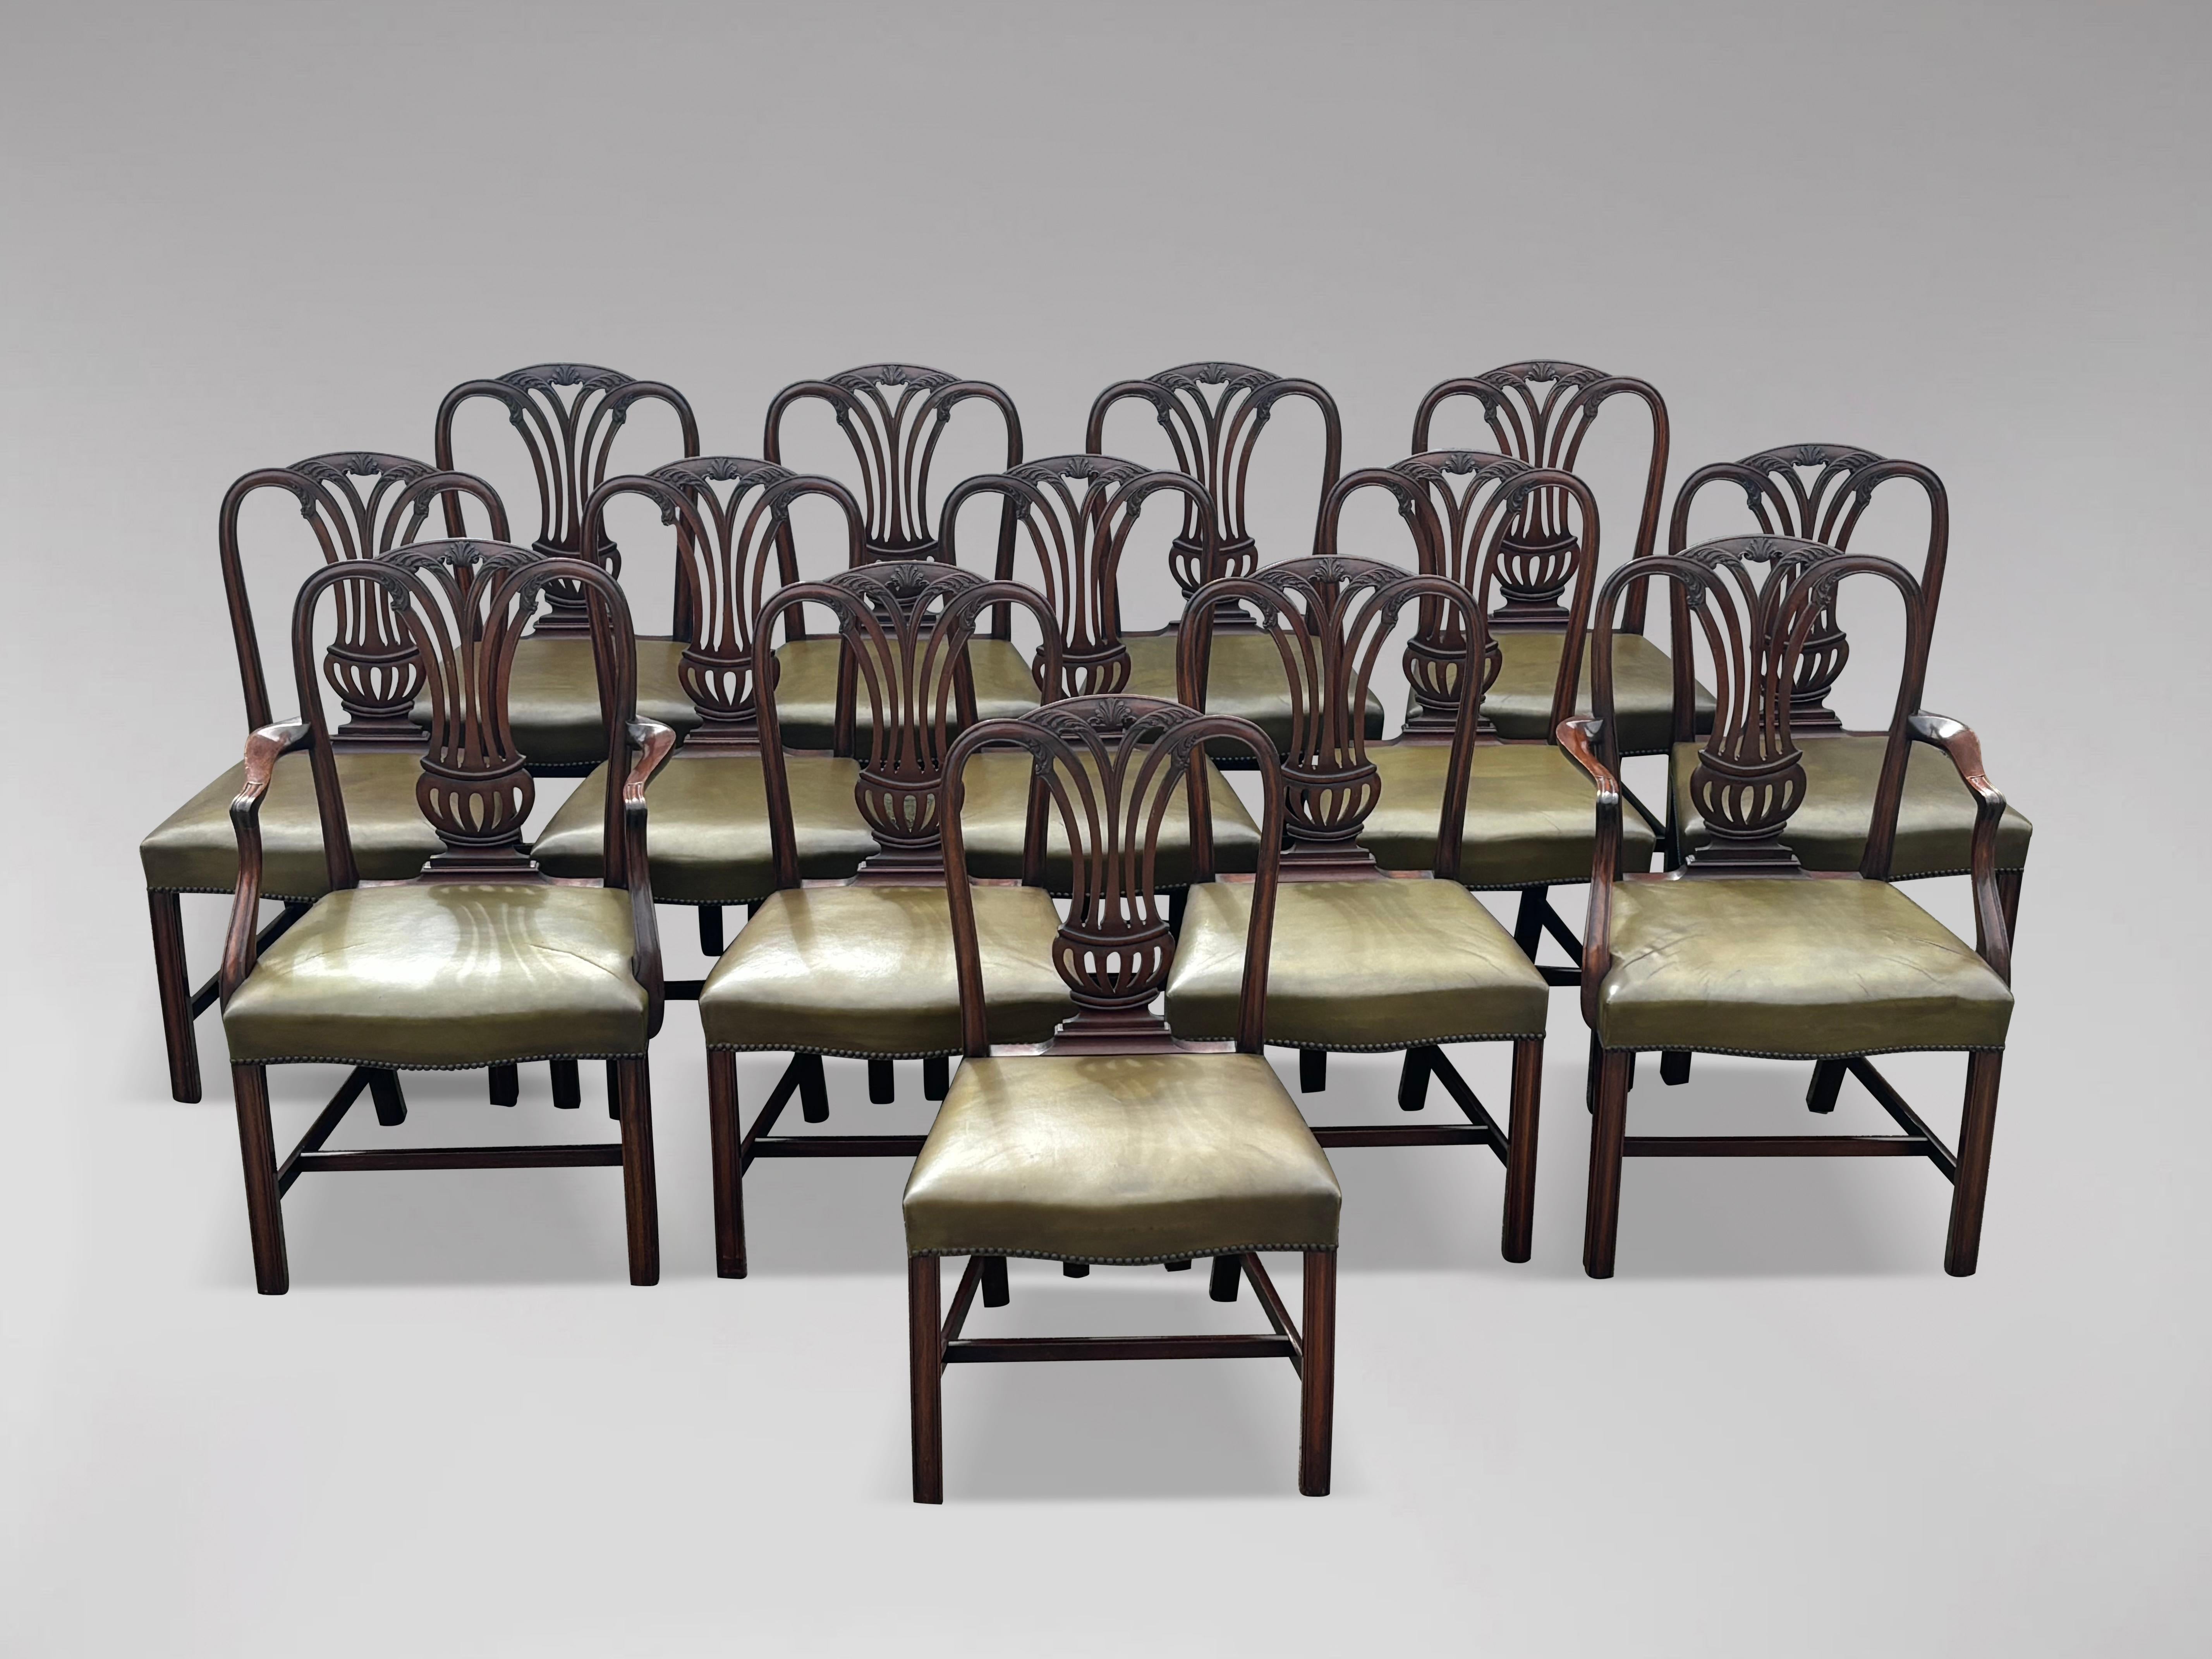 British Large Set of 14 Hepplewhite Dining Room Chairs For Sale